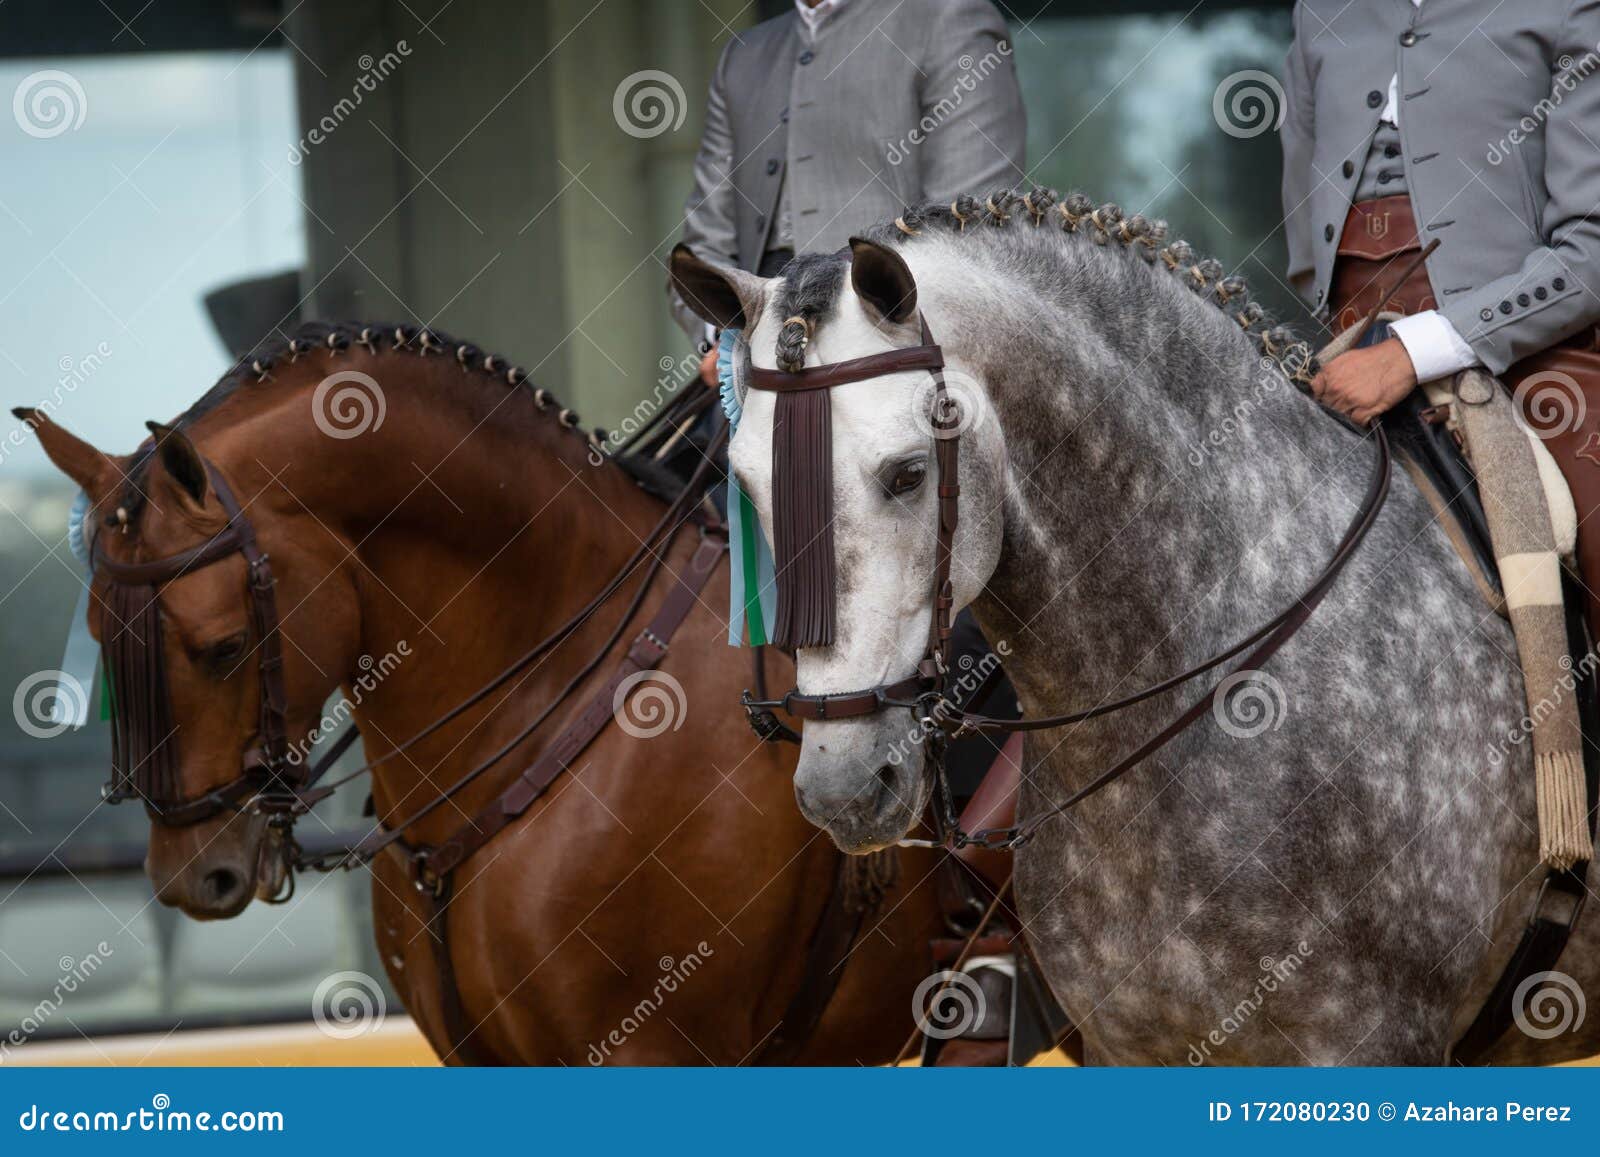 two spanish horses winner of doma vaquera competition in spain